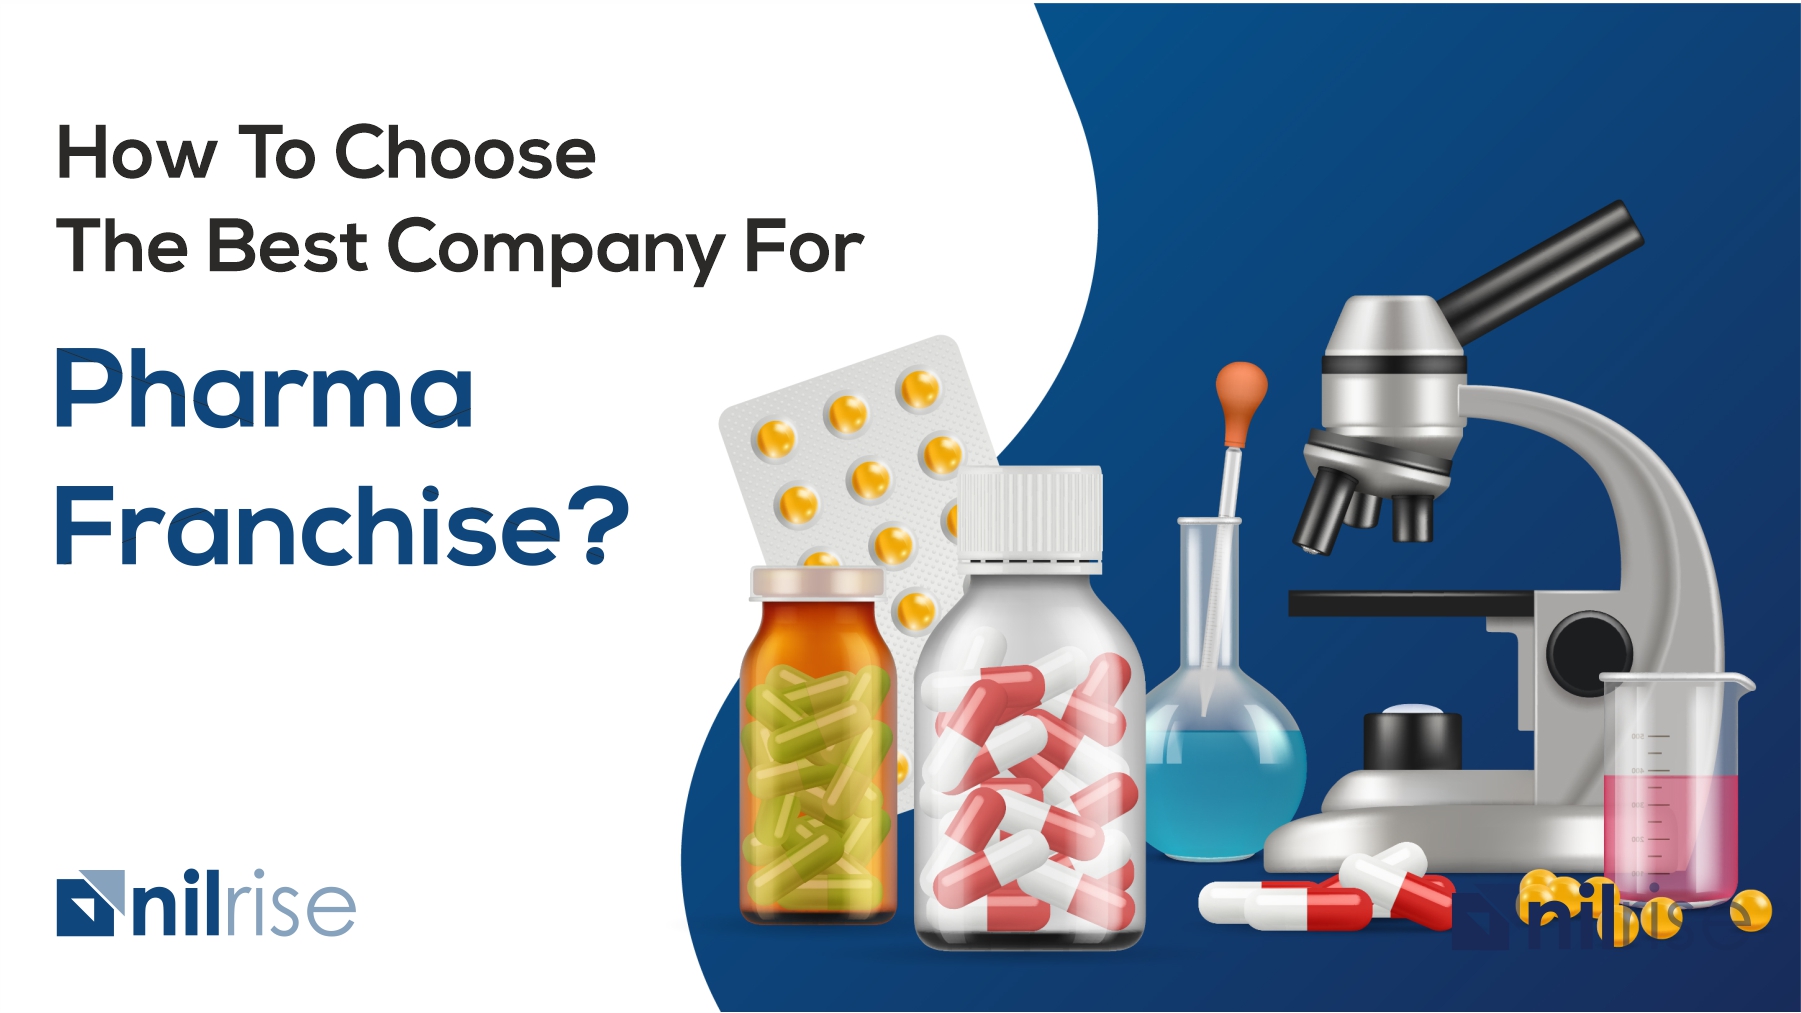 How to choose the best company for Pharma Franchise?